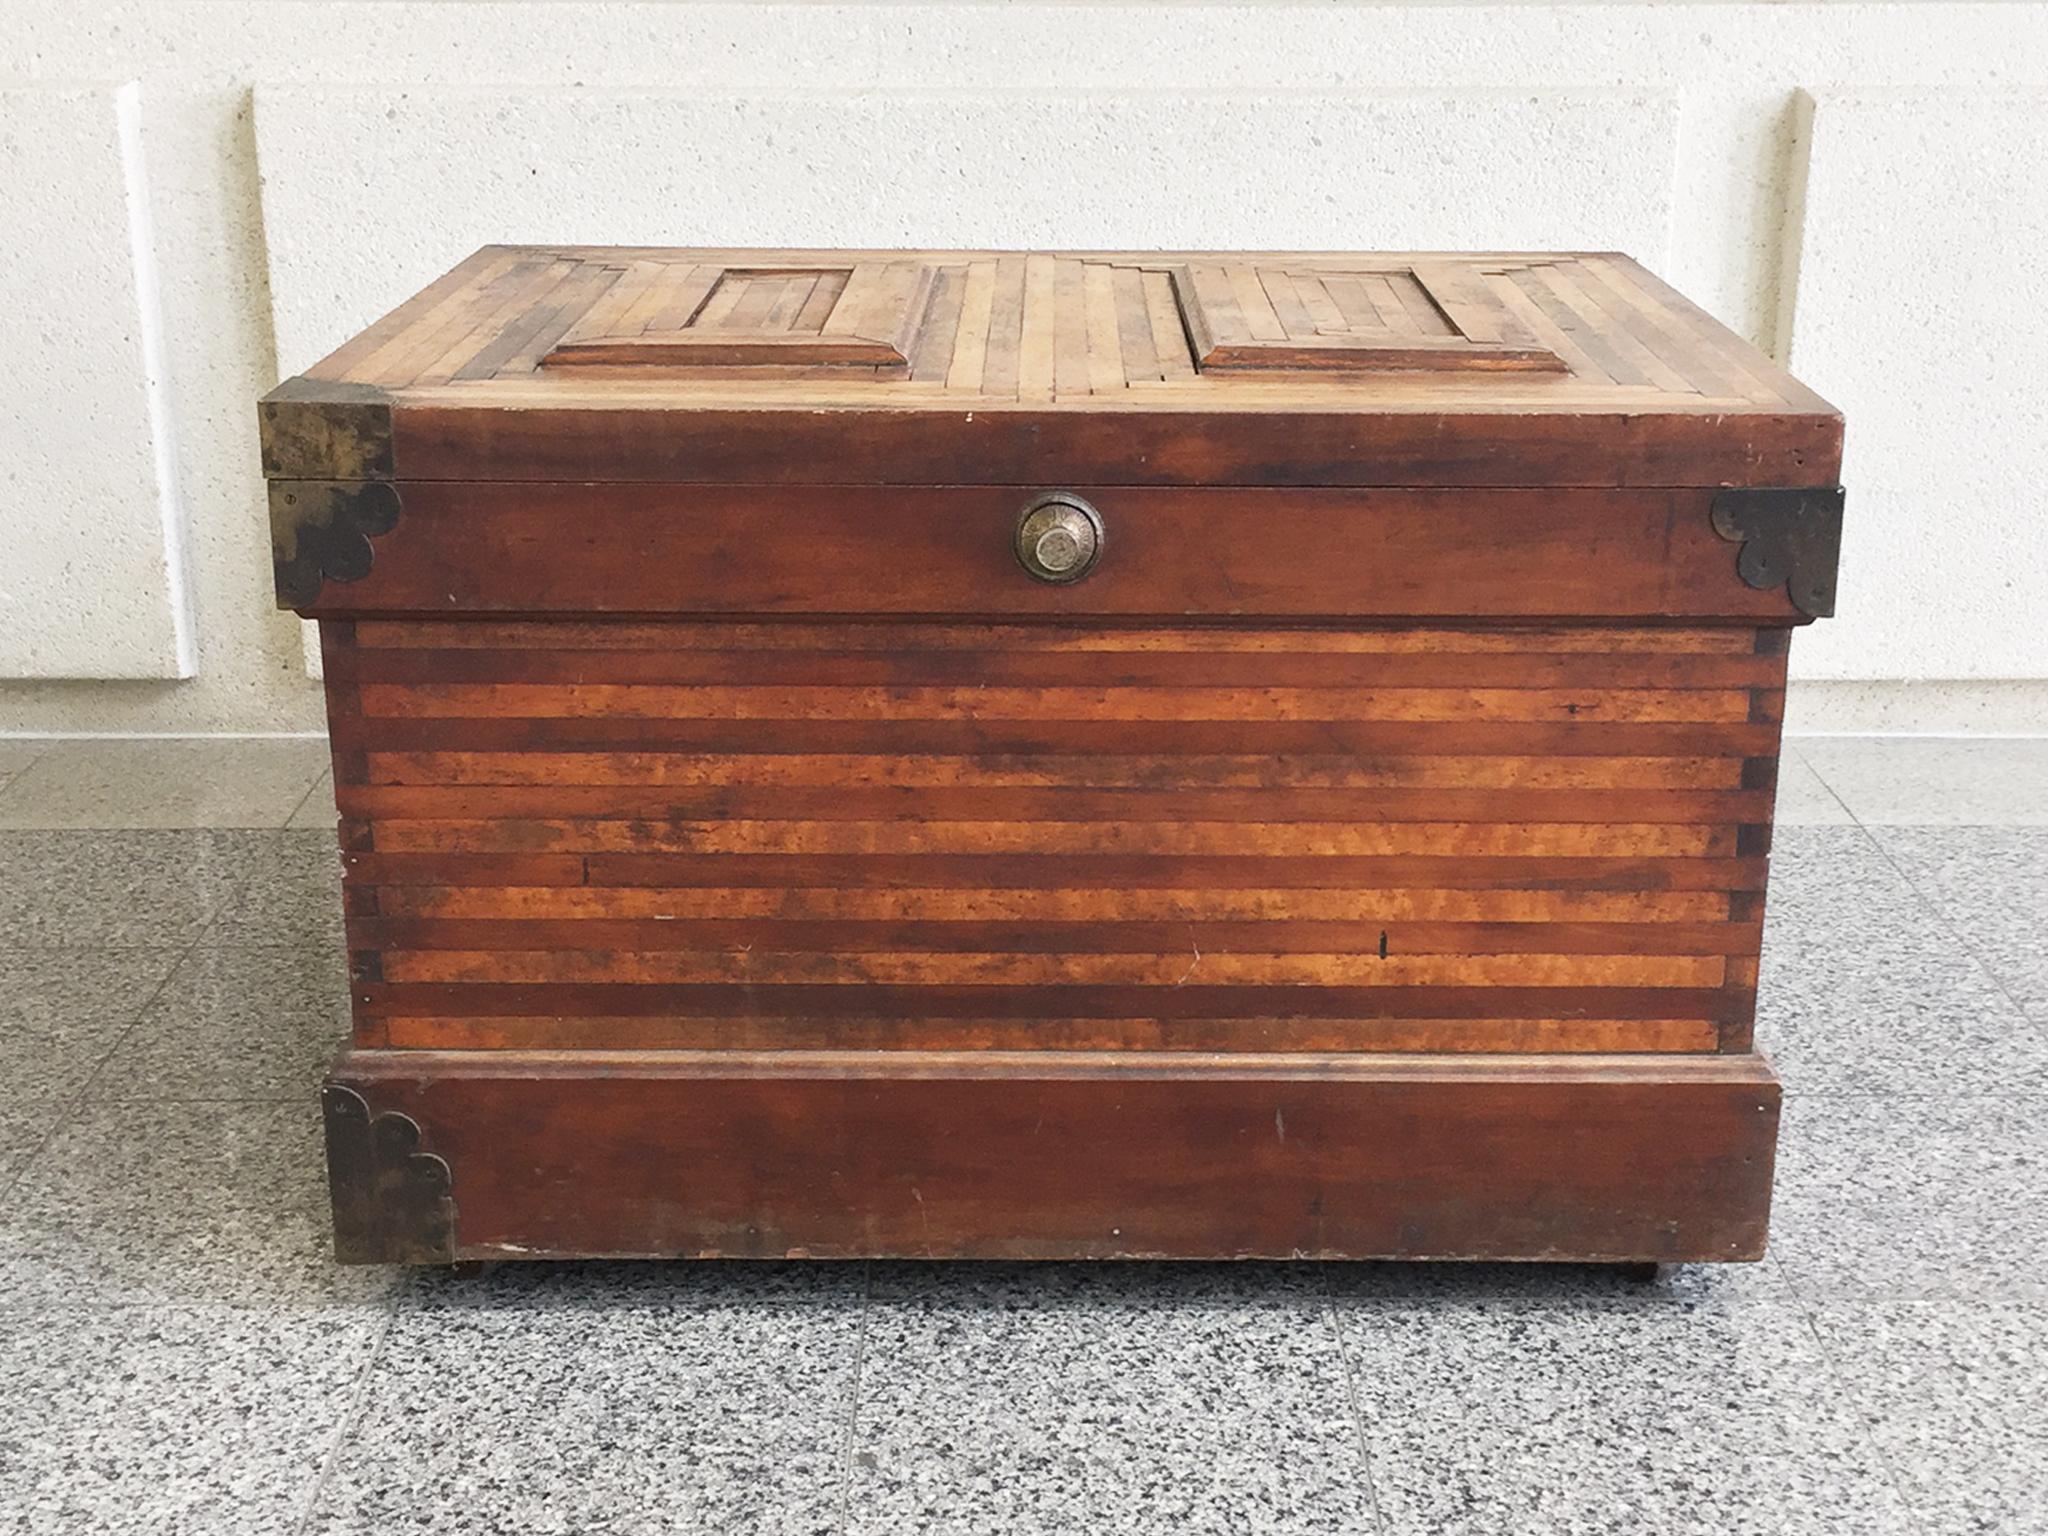 A 19th century trunk expertly crafted with a beautiful parquetry design. The parquetry of the trunk's hinged lid is comprised of two sets of concentric rectangles set side by side, culminating in a raised center with an ogee bevel. Two-toned wood in